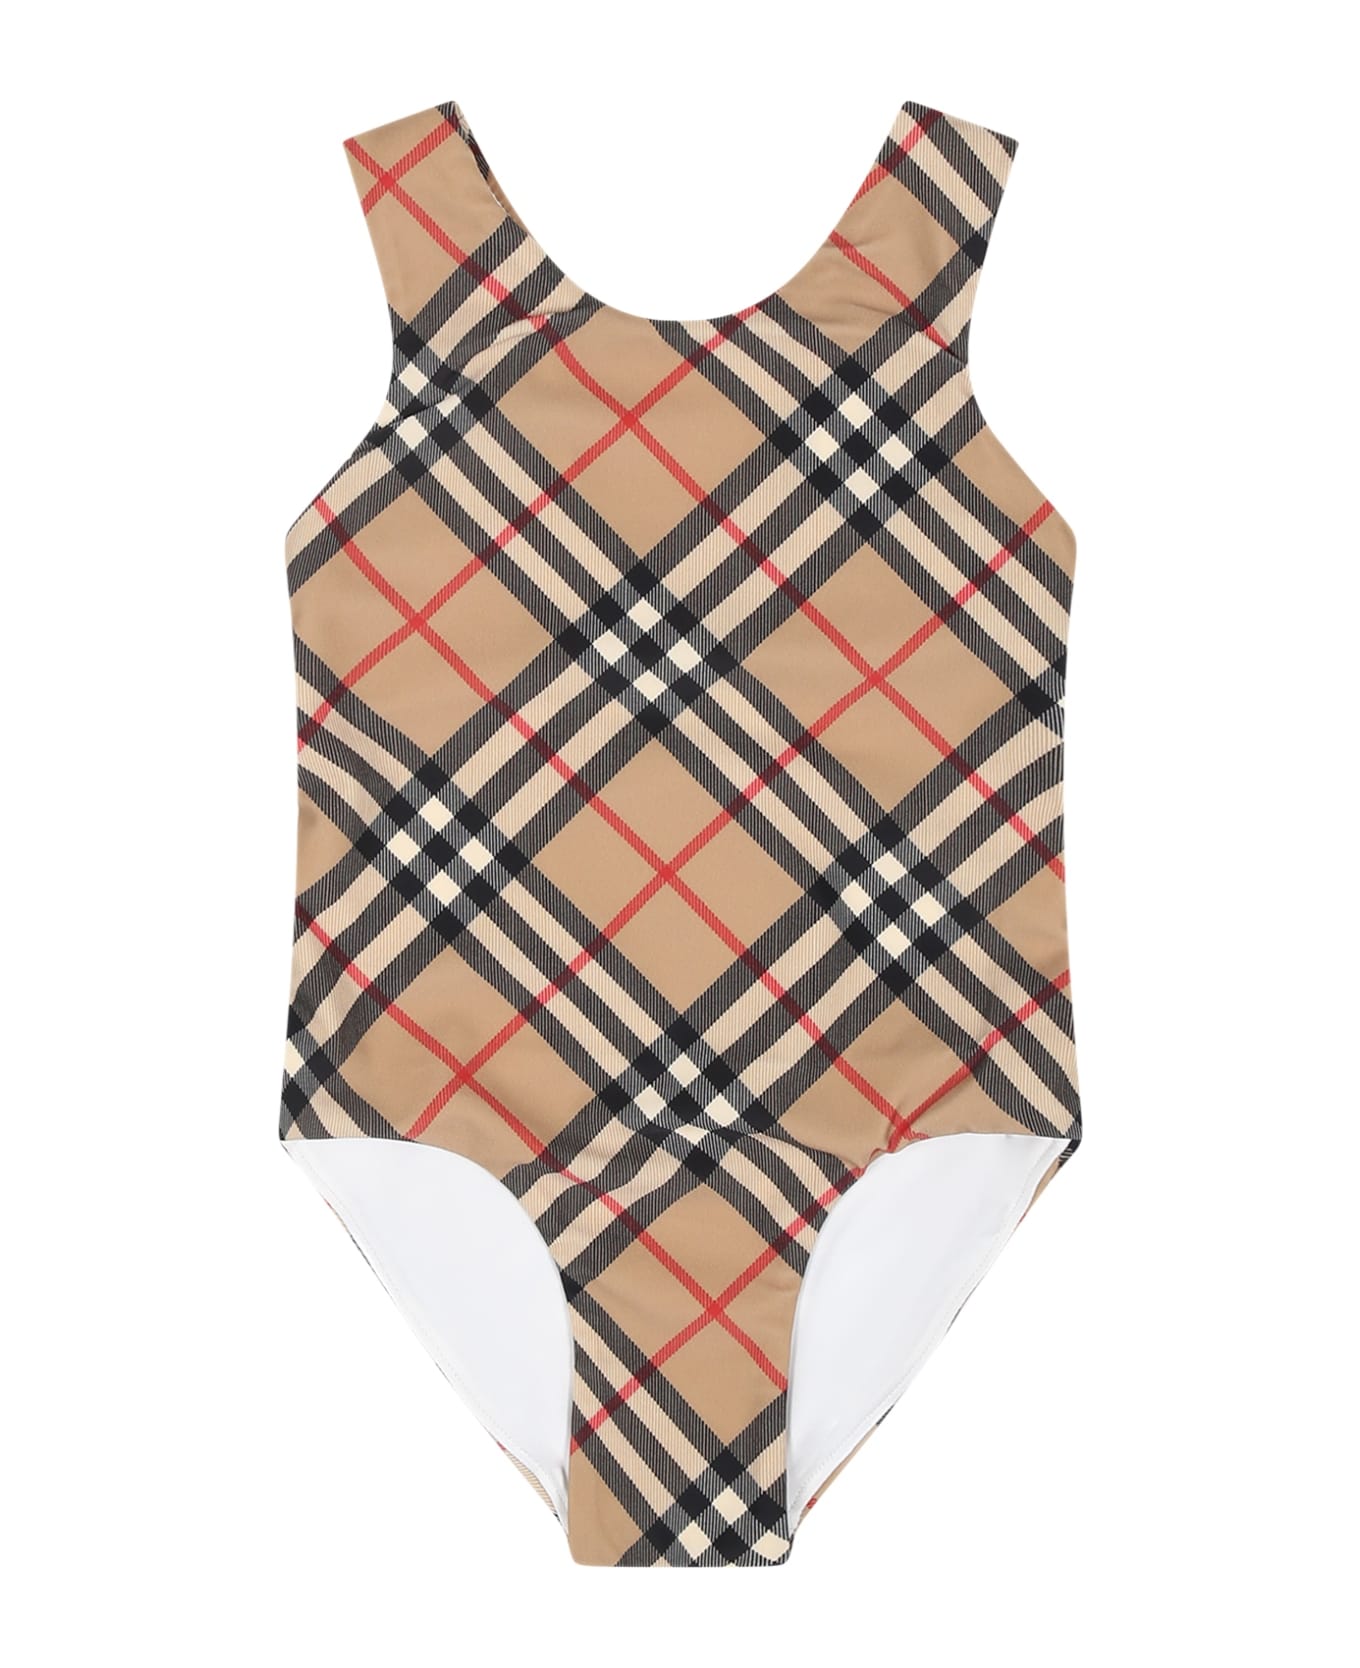 Burberry Beige Swimsuit For Baby Girl With Iconic Check - Archive beige